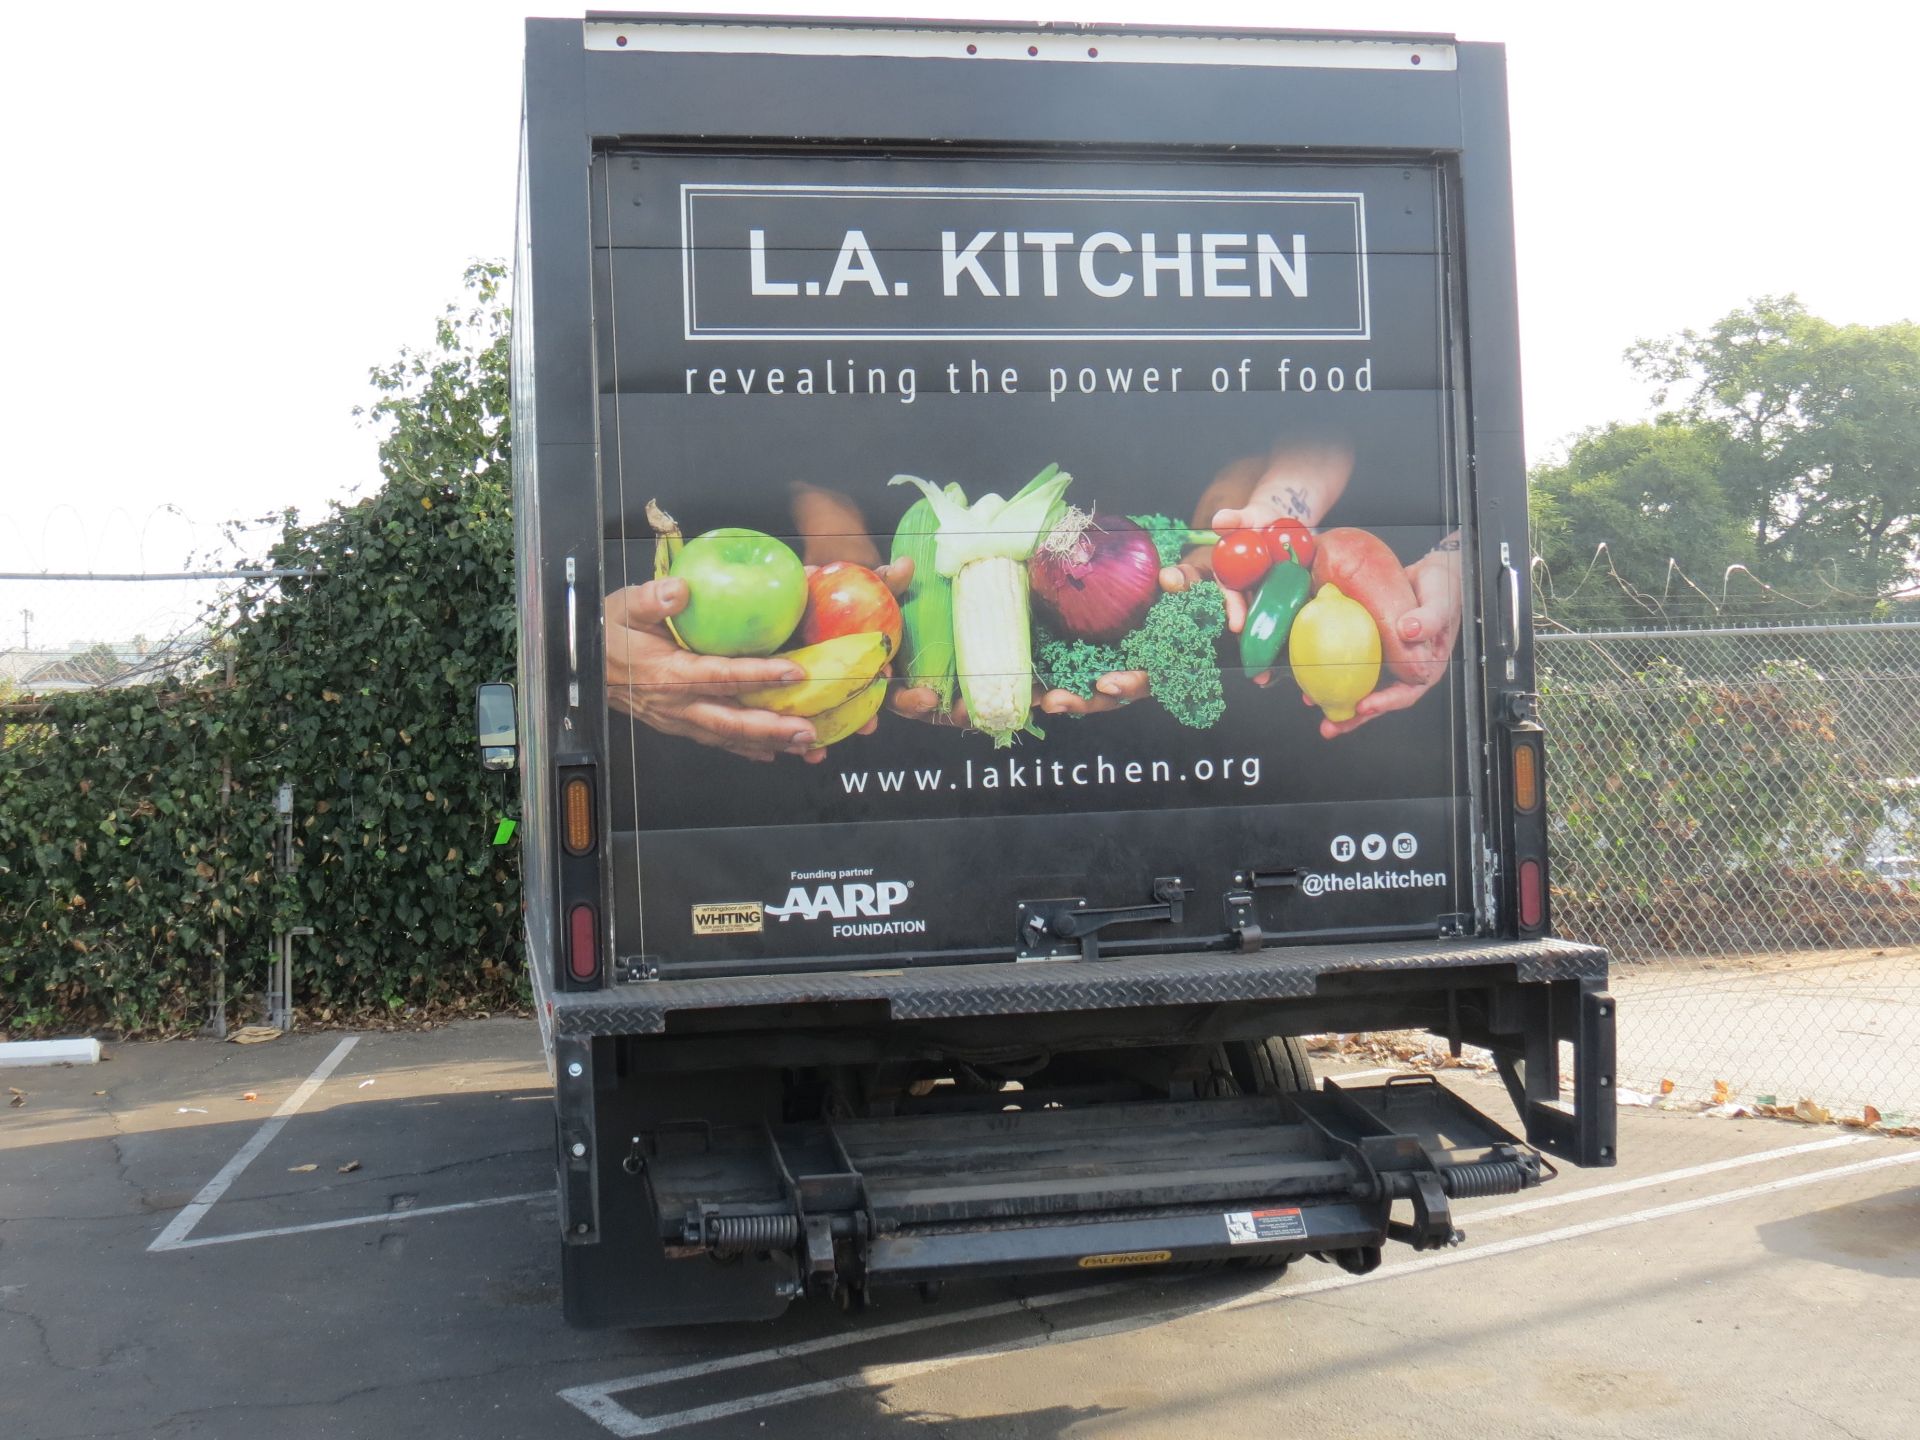 2012, ISUZU REFRIGERATED BOX TRUCK, 16' BOX, LIFTGATE, SIDE DOOR, 102,800 MILES,CNG FUEL - Image 4 of 8